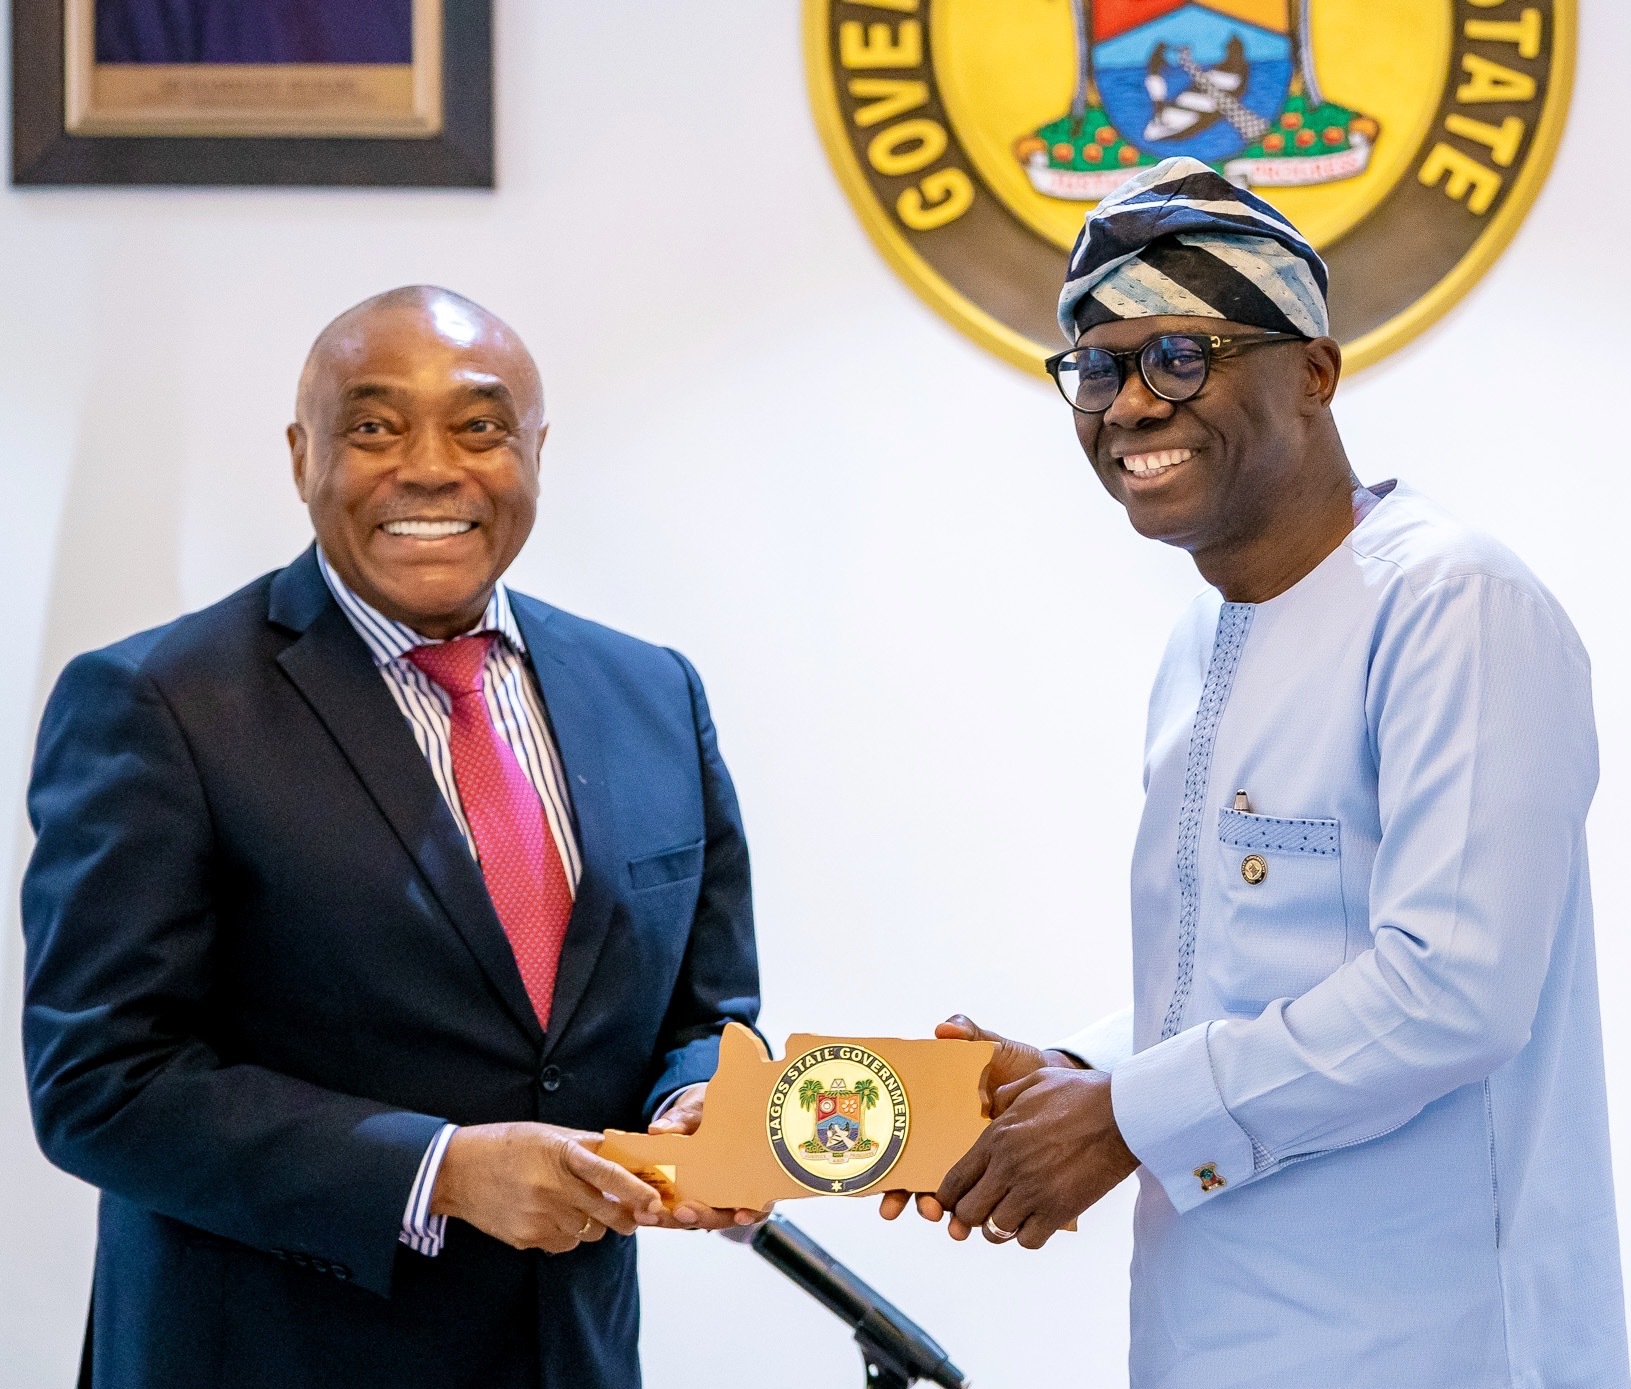 L-R: Independent Non-Executive Director of Dangote Cement Plc, Mr. Emmanuel Ikazoboh, receiving a plaque from Lagos State Governor, Mr. Babajide Sanwo-Olu, during a courtesy visit to the Governor by the executive management of Dangote Cement Plc at Lagos House, Marina, on Wednesday, March 18, 2020.